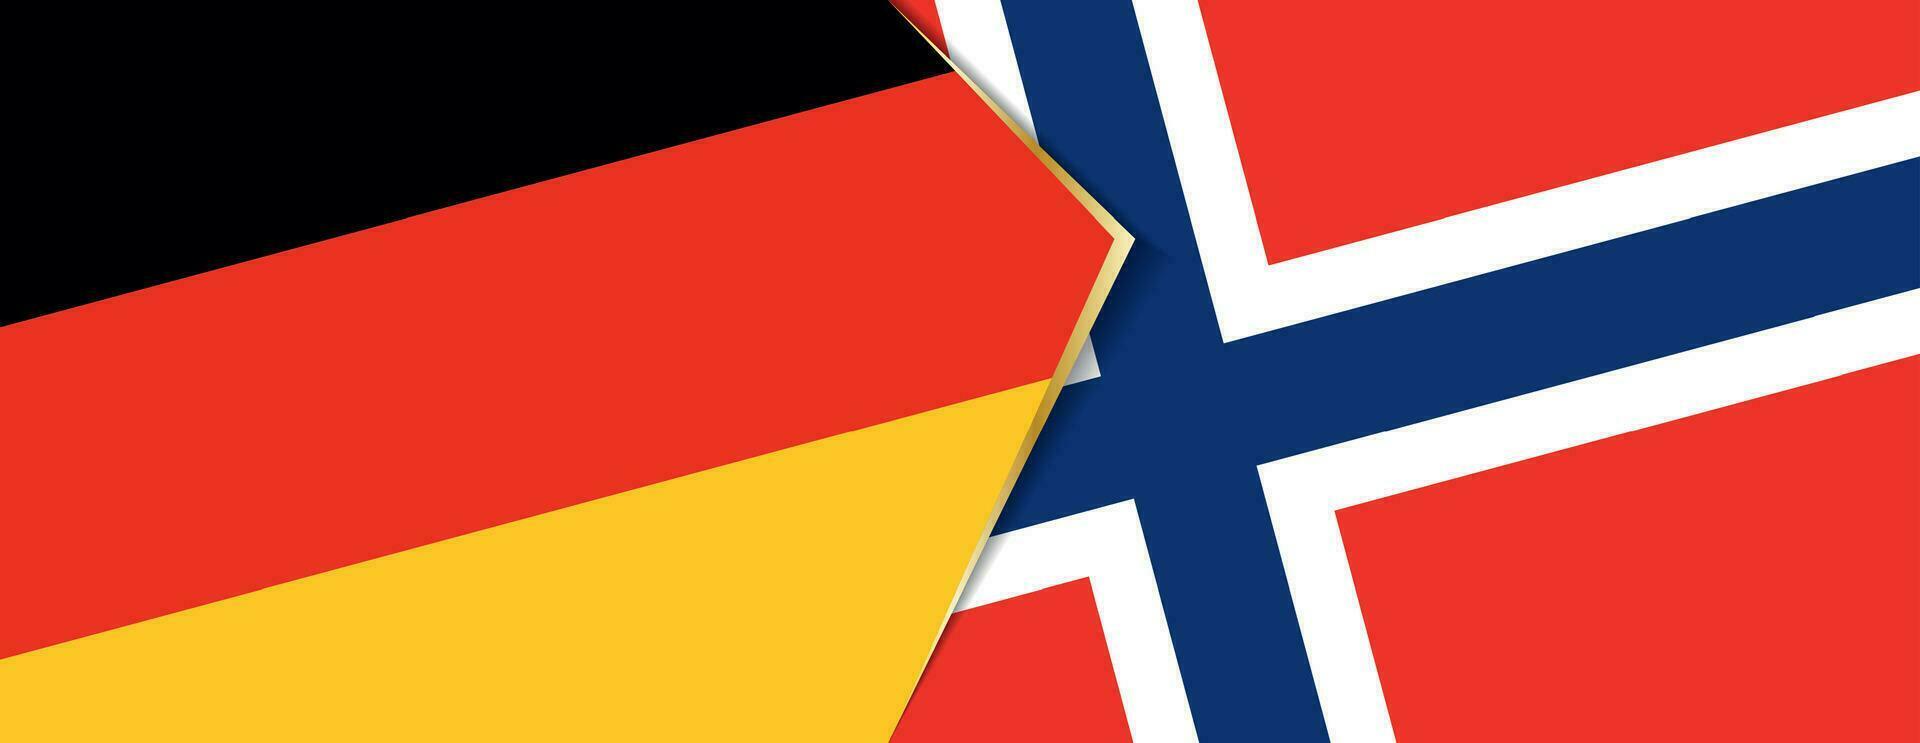 Germany and Norway flags, two vector flags